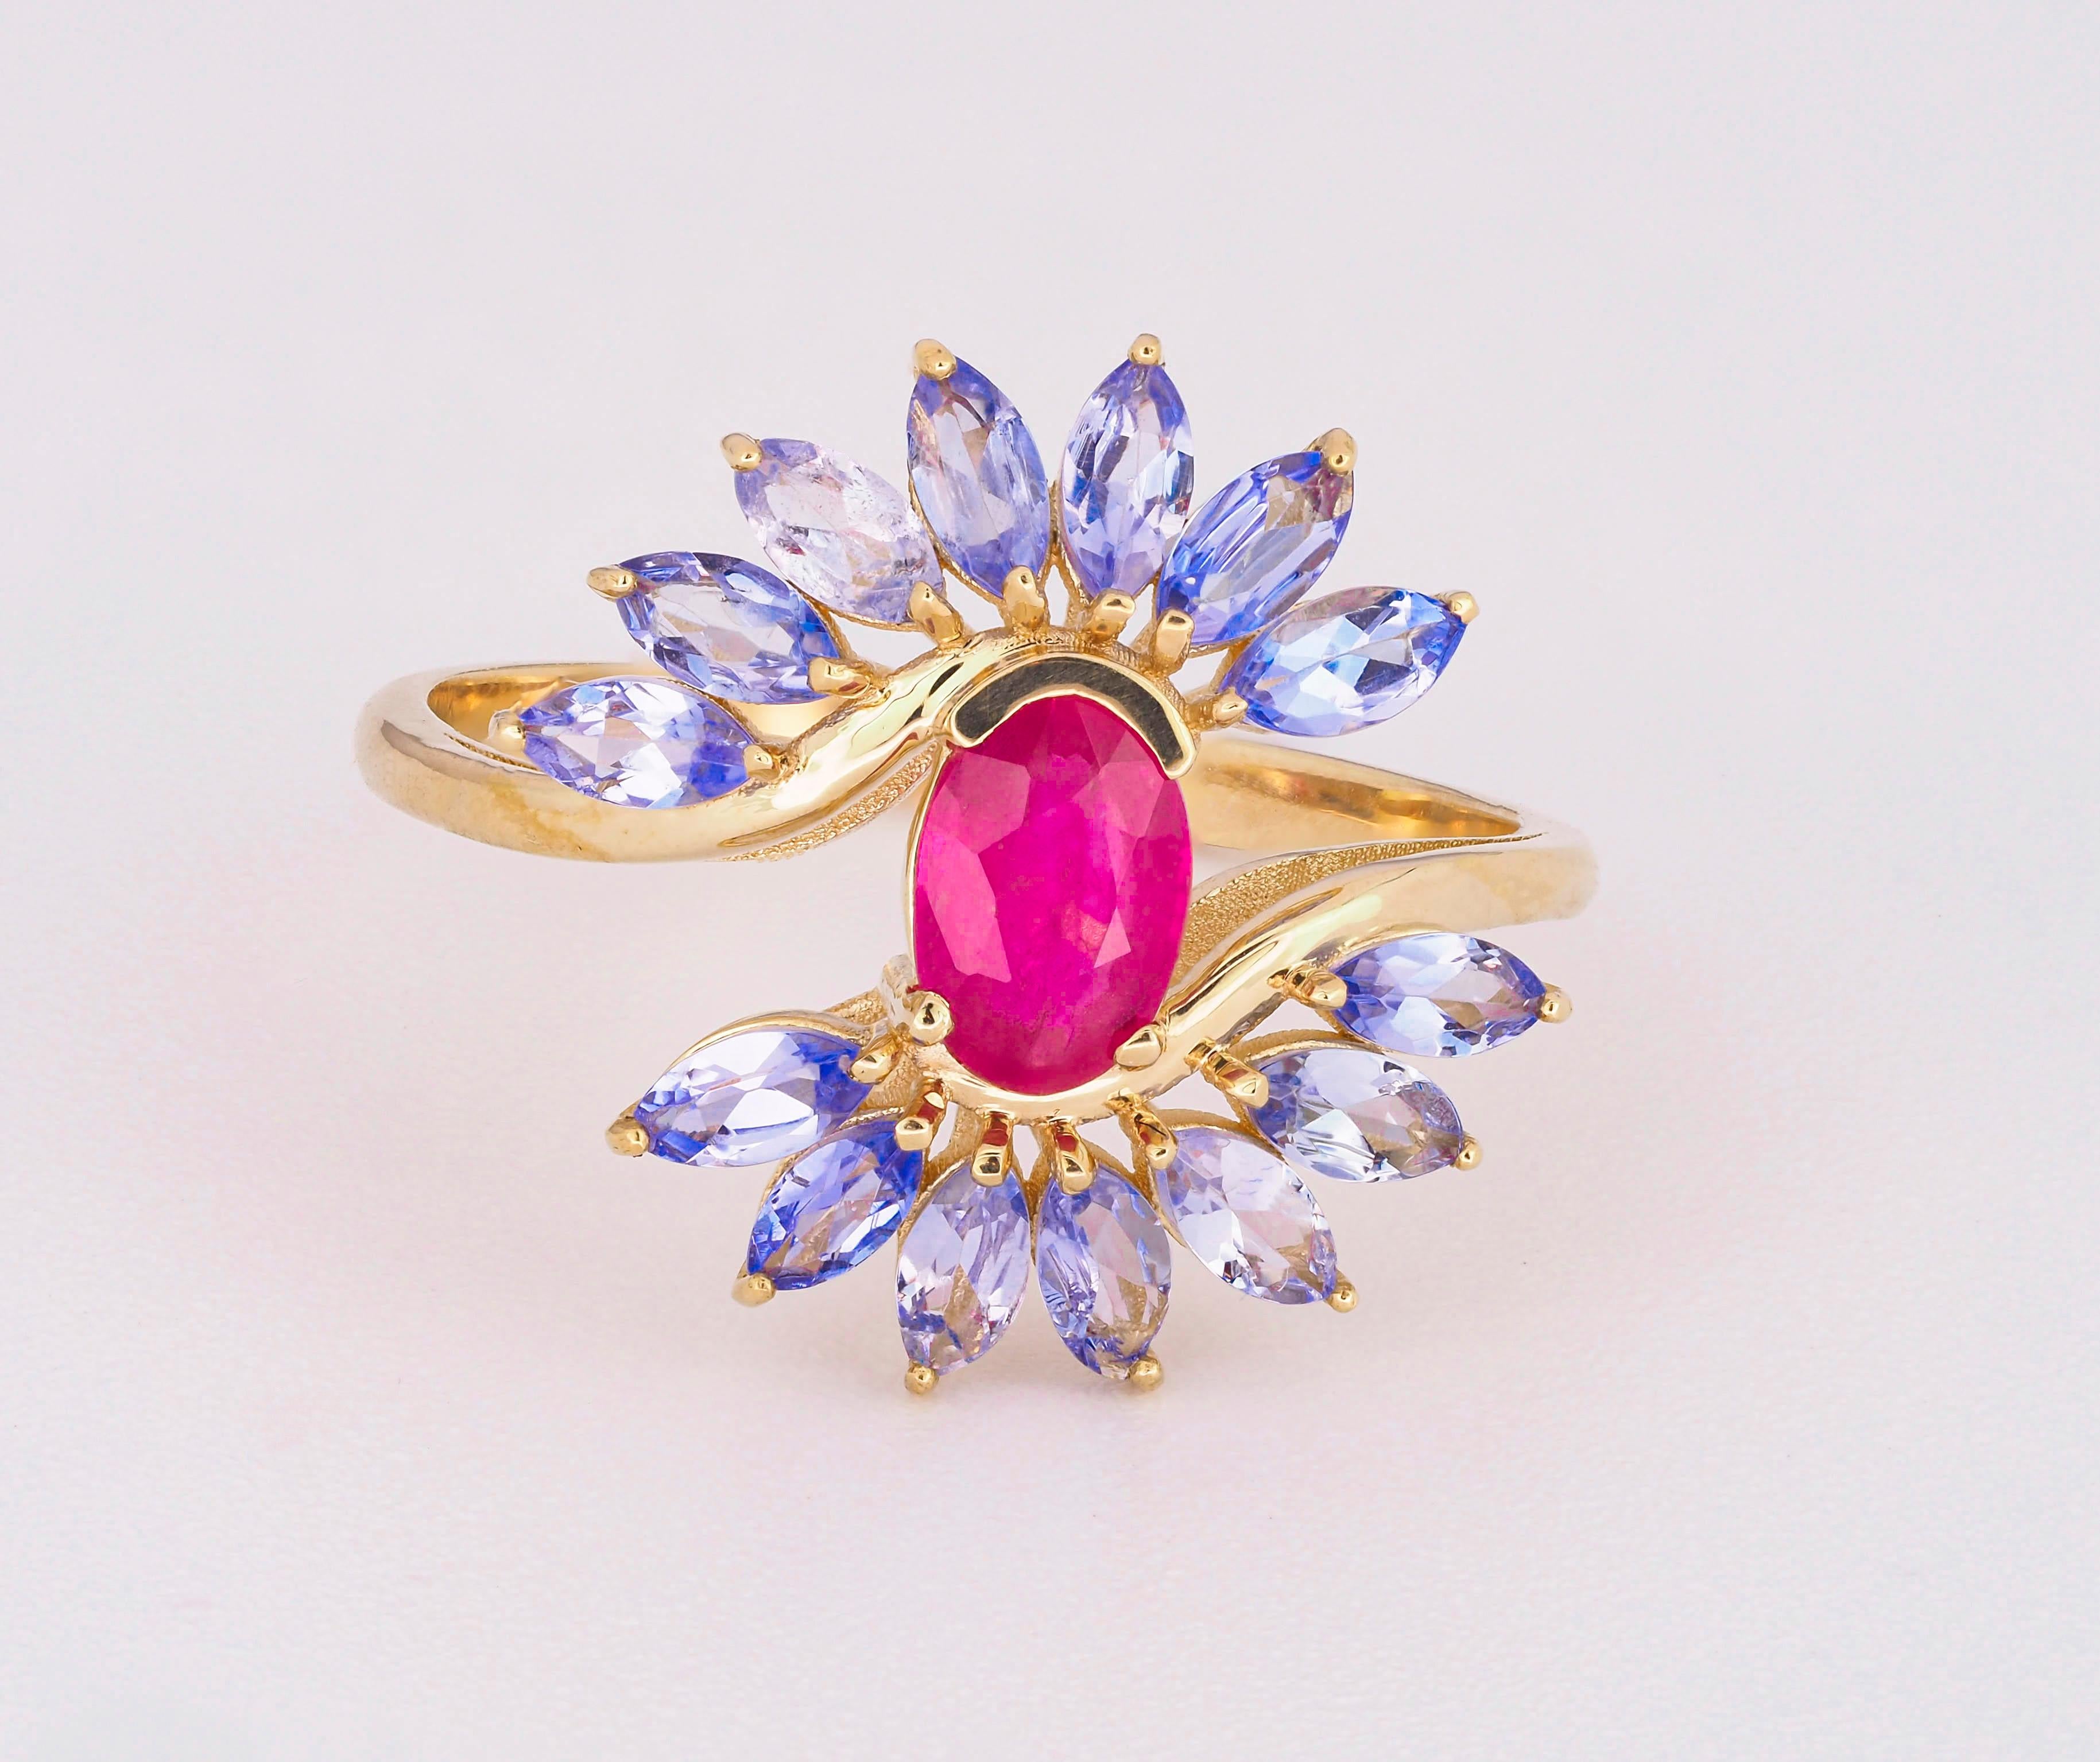 For Sale:  14 karat Gold Ring with Ruby and Tanzanites. Oval ruby ring. Tanzanite ring! 3